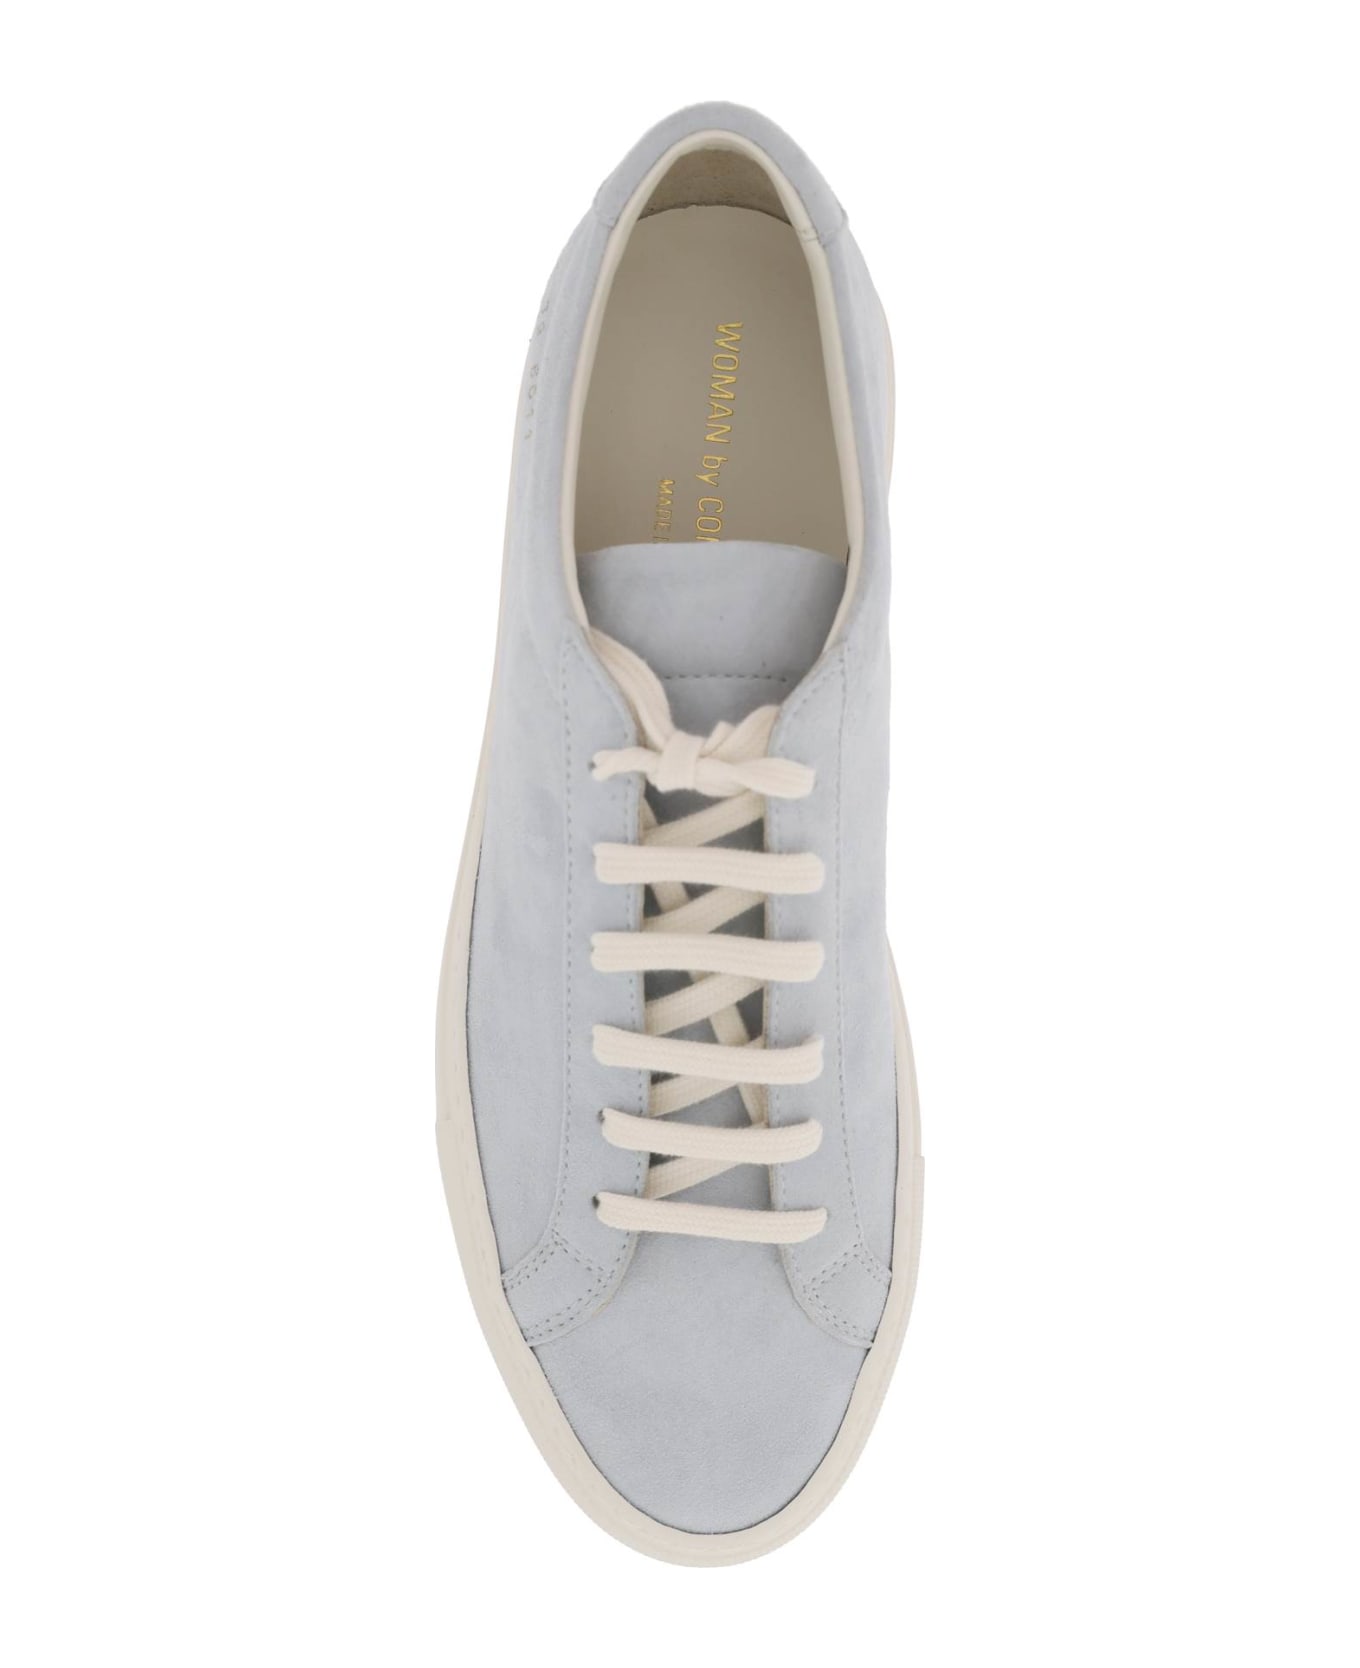 Common Projects 'contrast Achilles' Baby Blue Suede Sneakers - BABY BLUE (Light blue)